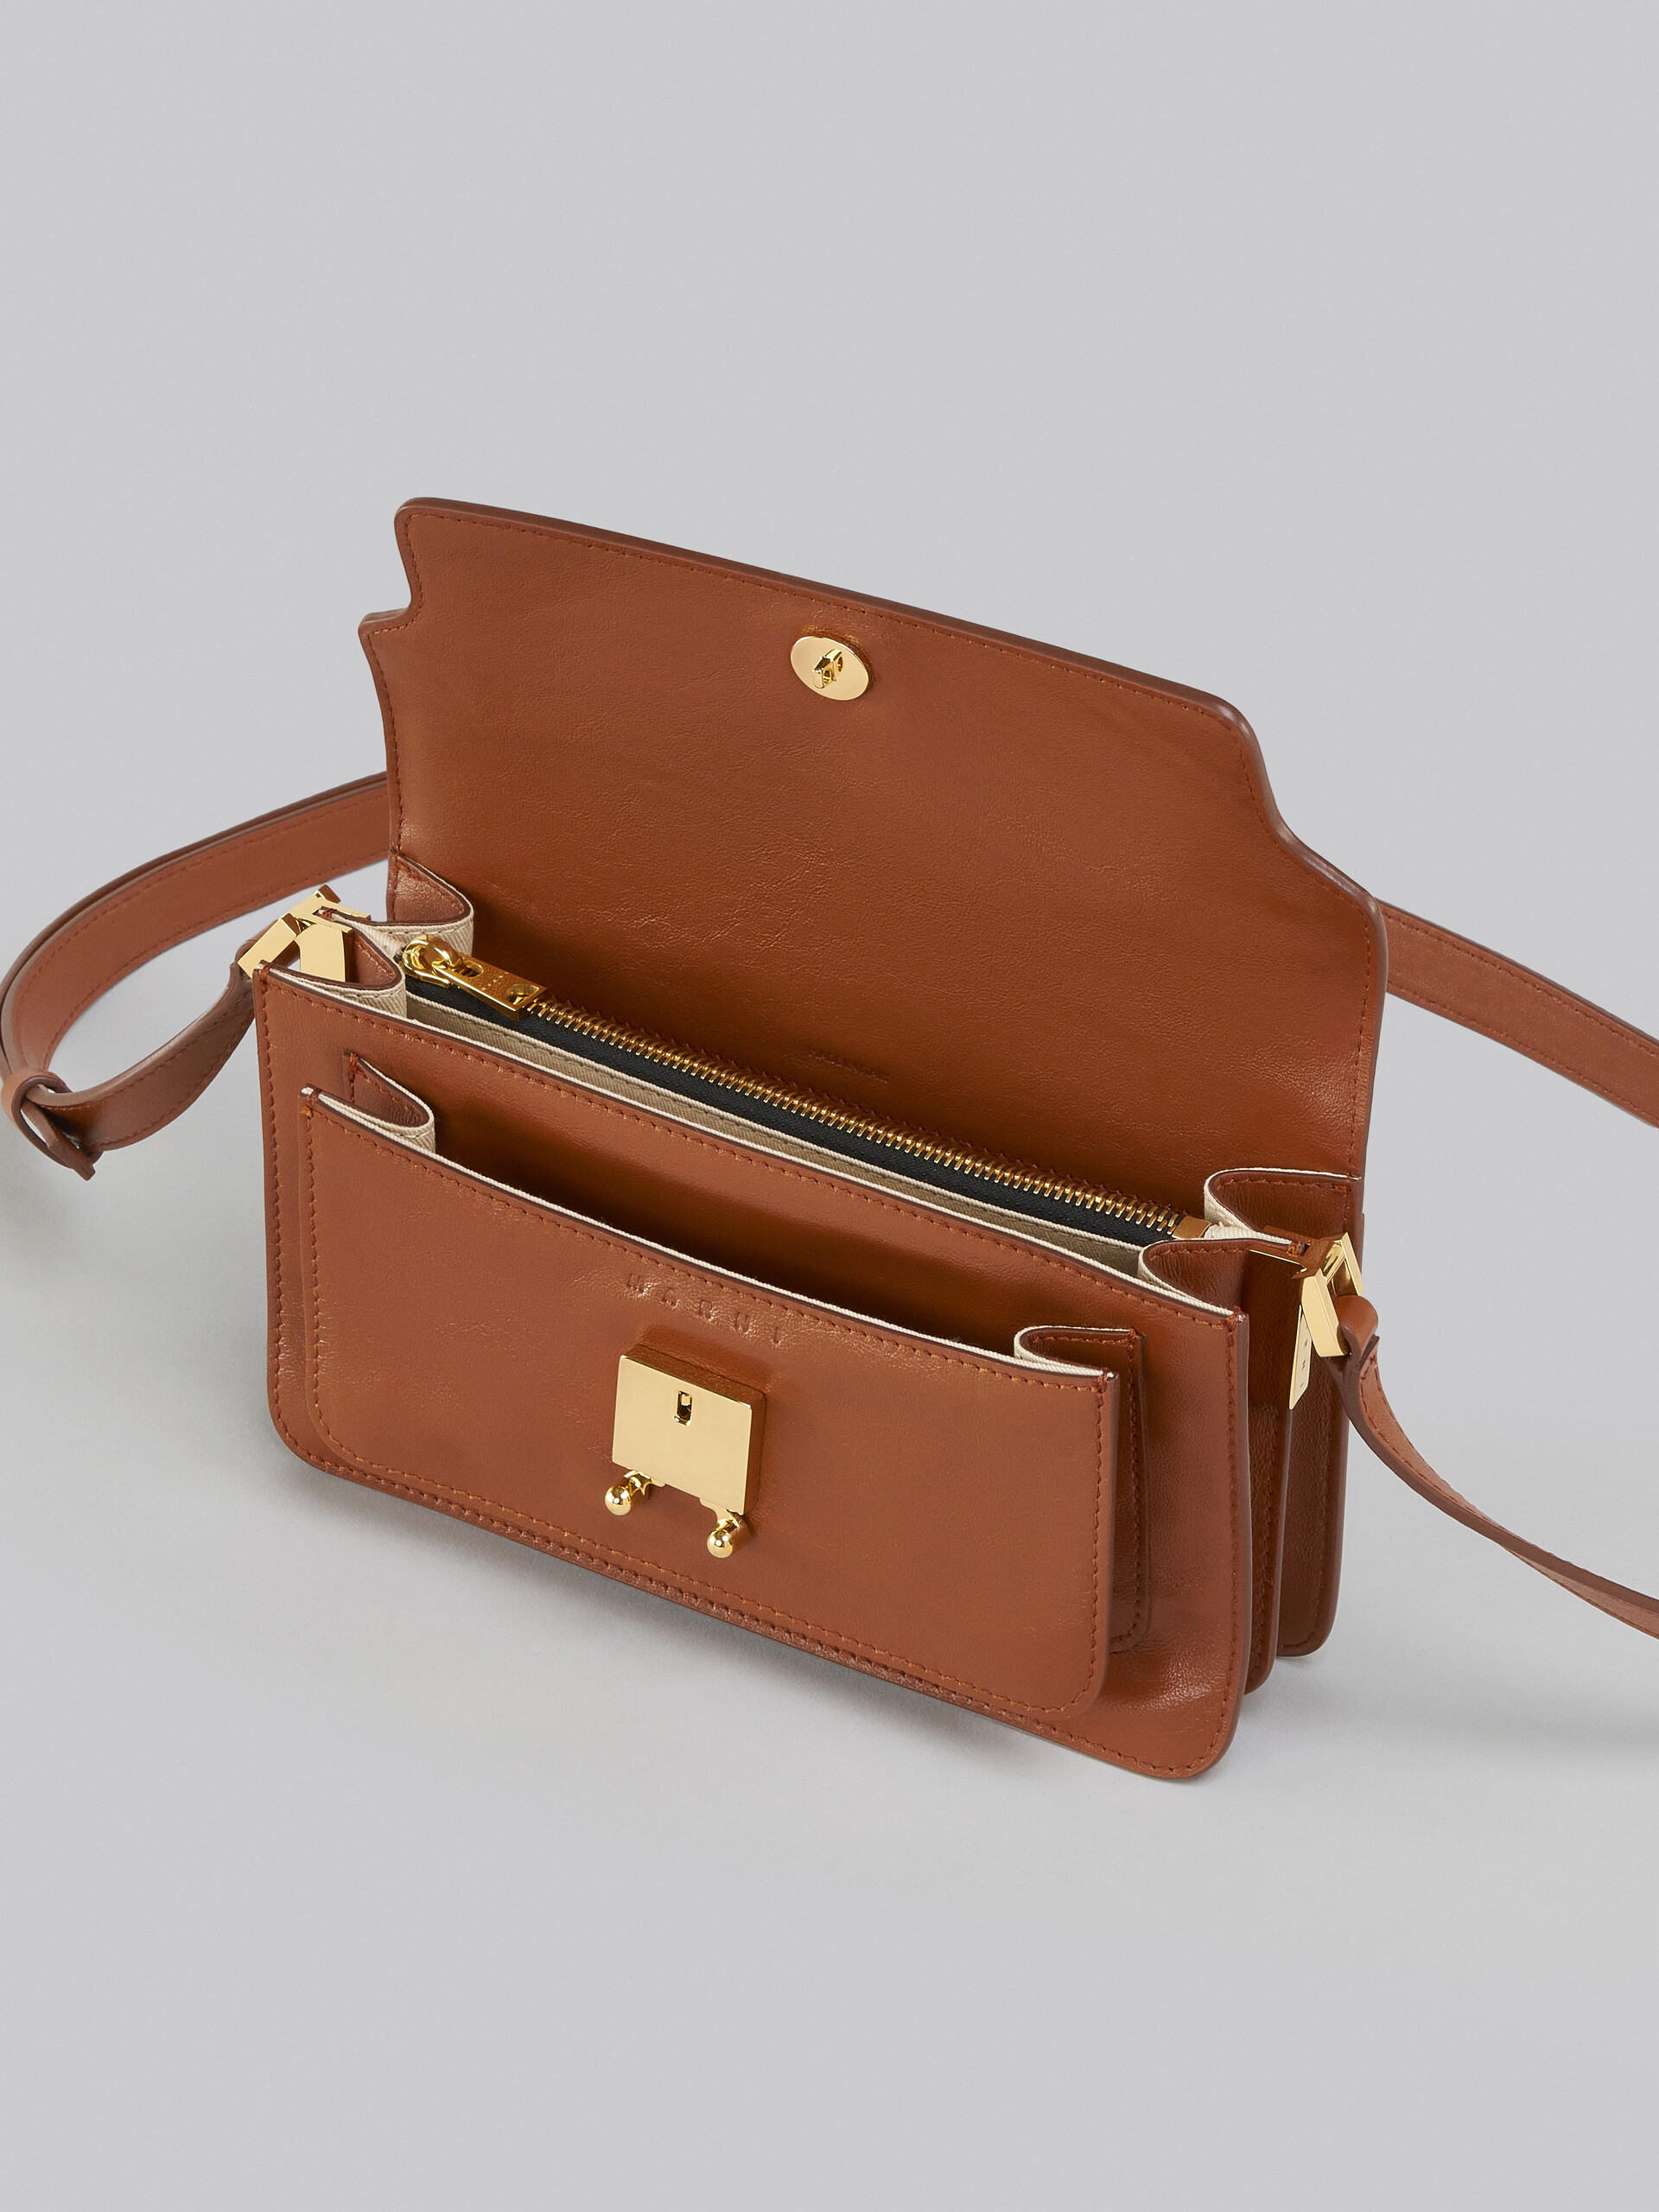 Trunk Soft Bag E/W in brown leather - Shoulder Bags - Image 3